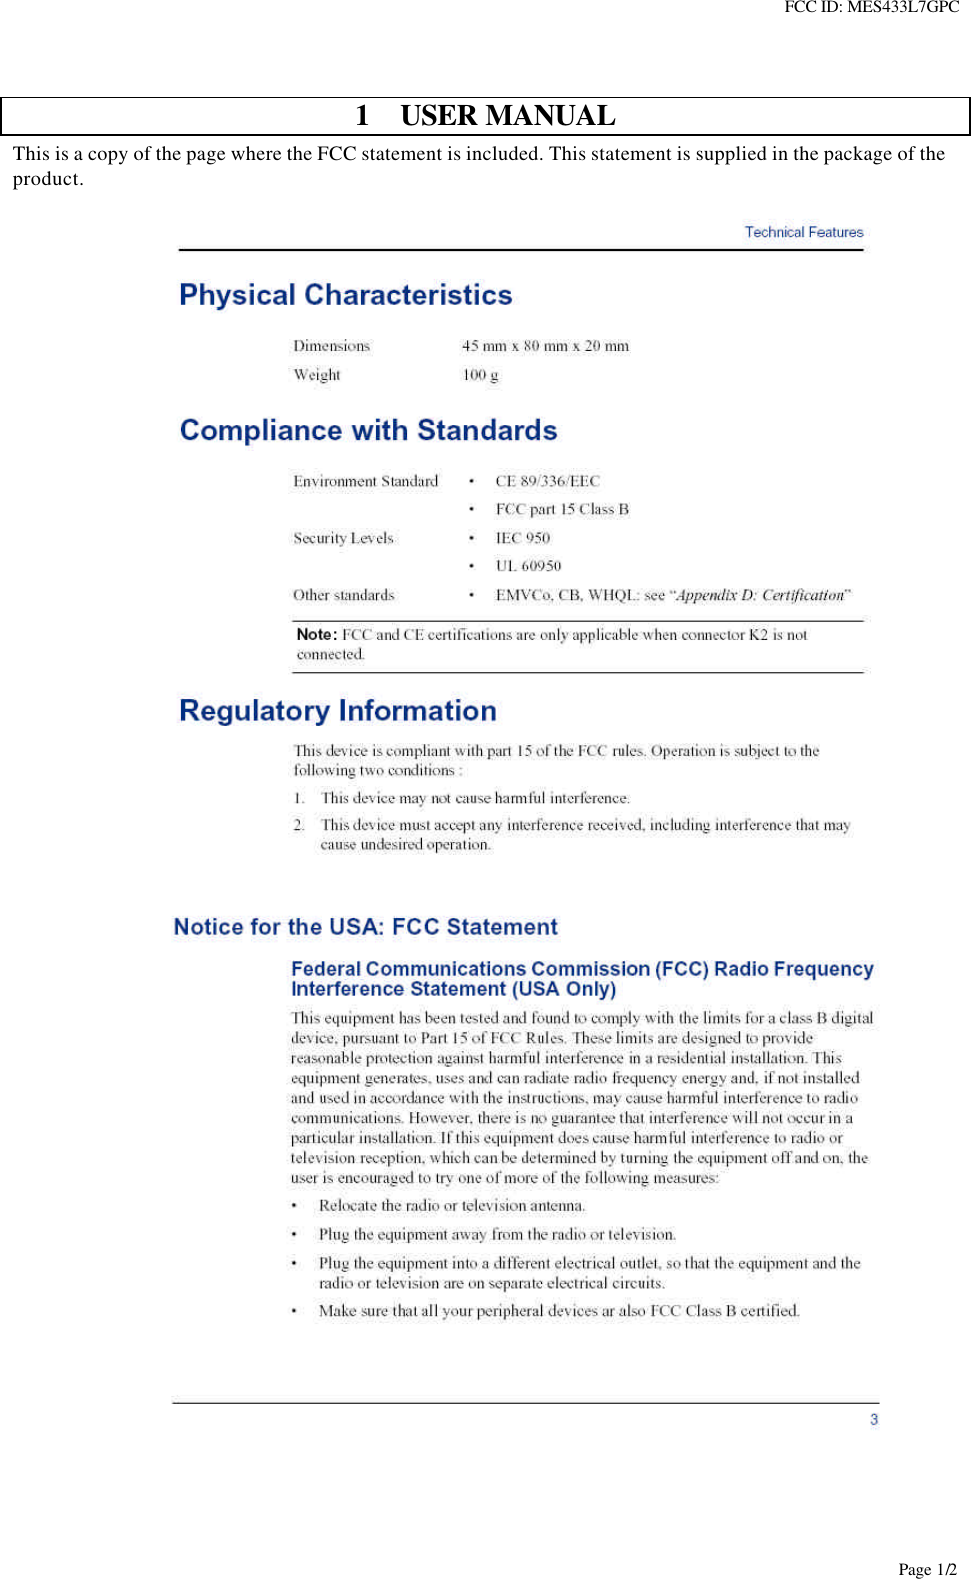 FCC ID: MES433L7GPCPage 1/21 USER MANUALThis is a copy of the page where the FCC statement is included. This statement is supplied in the package of theproduct.